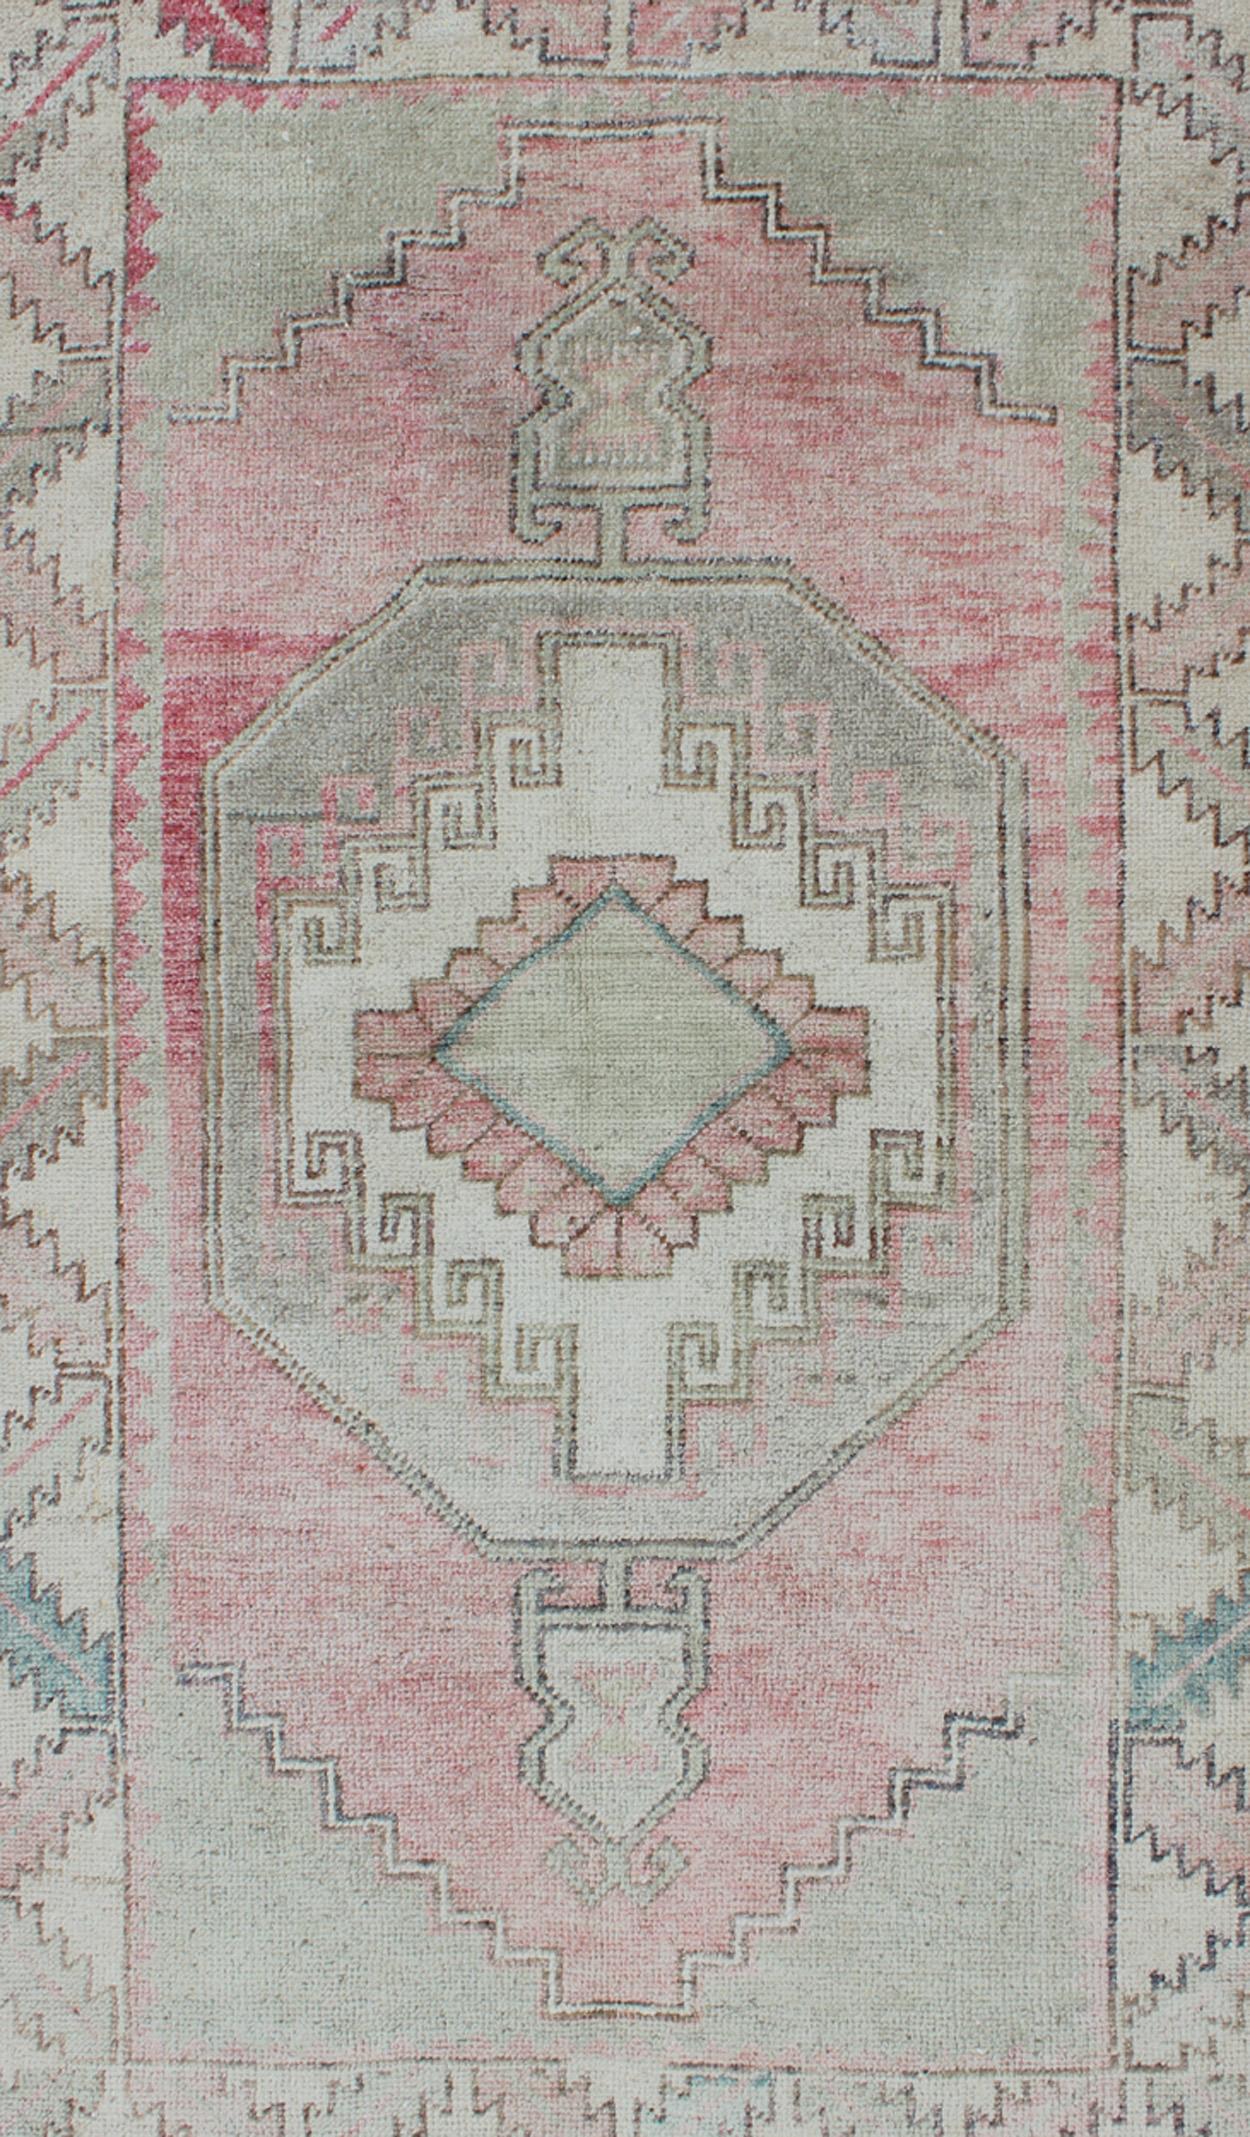 Pink, light green, and ivory vintage rug with flower medallion pattern, Keivan Woven Arts / rug/EN-176255, country of origin / type: Turkey / Oushak, circa 1940
This vintage oushak carpet features a beautiful flower pattern, set atop a pink